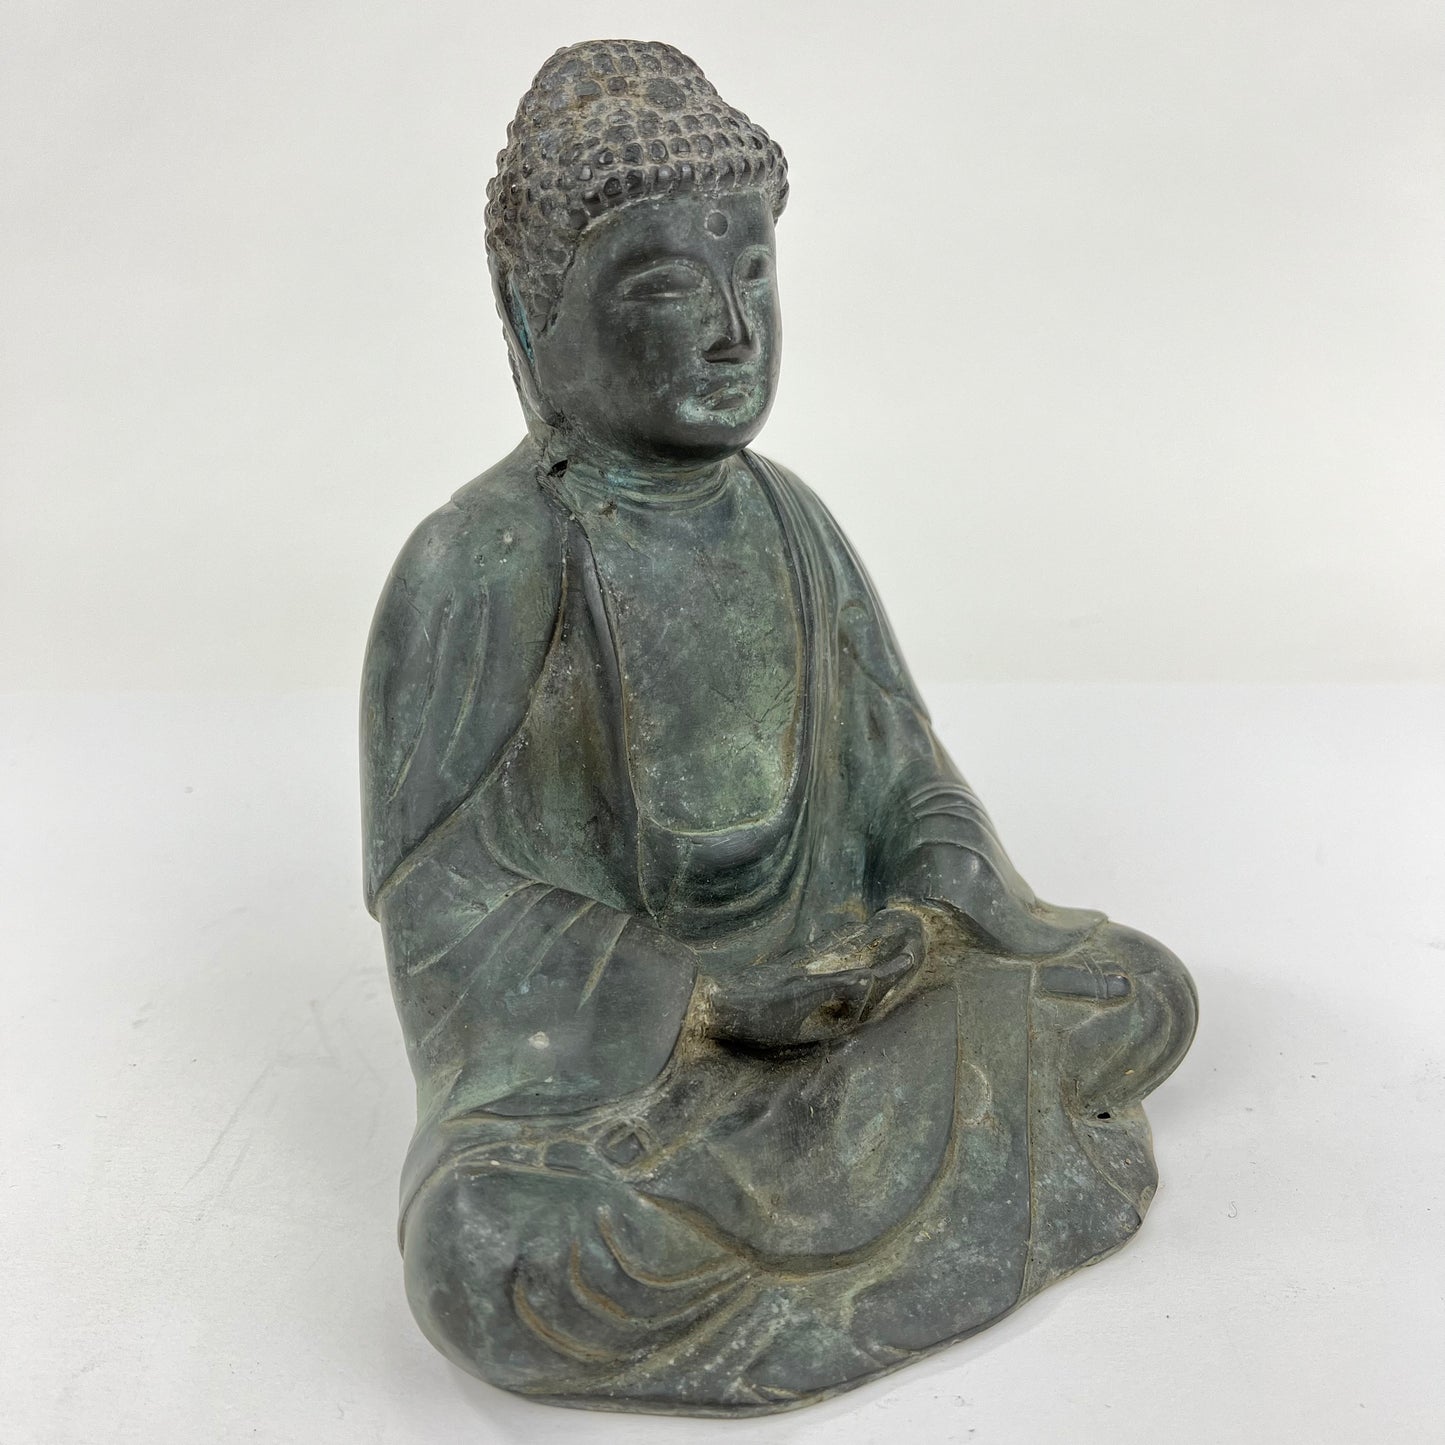 Vintage Japanese Bronze Statue of Buddha in Seated Meditation 6.5"H